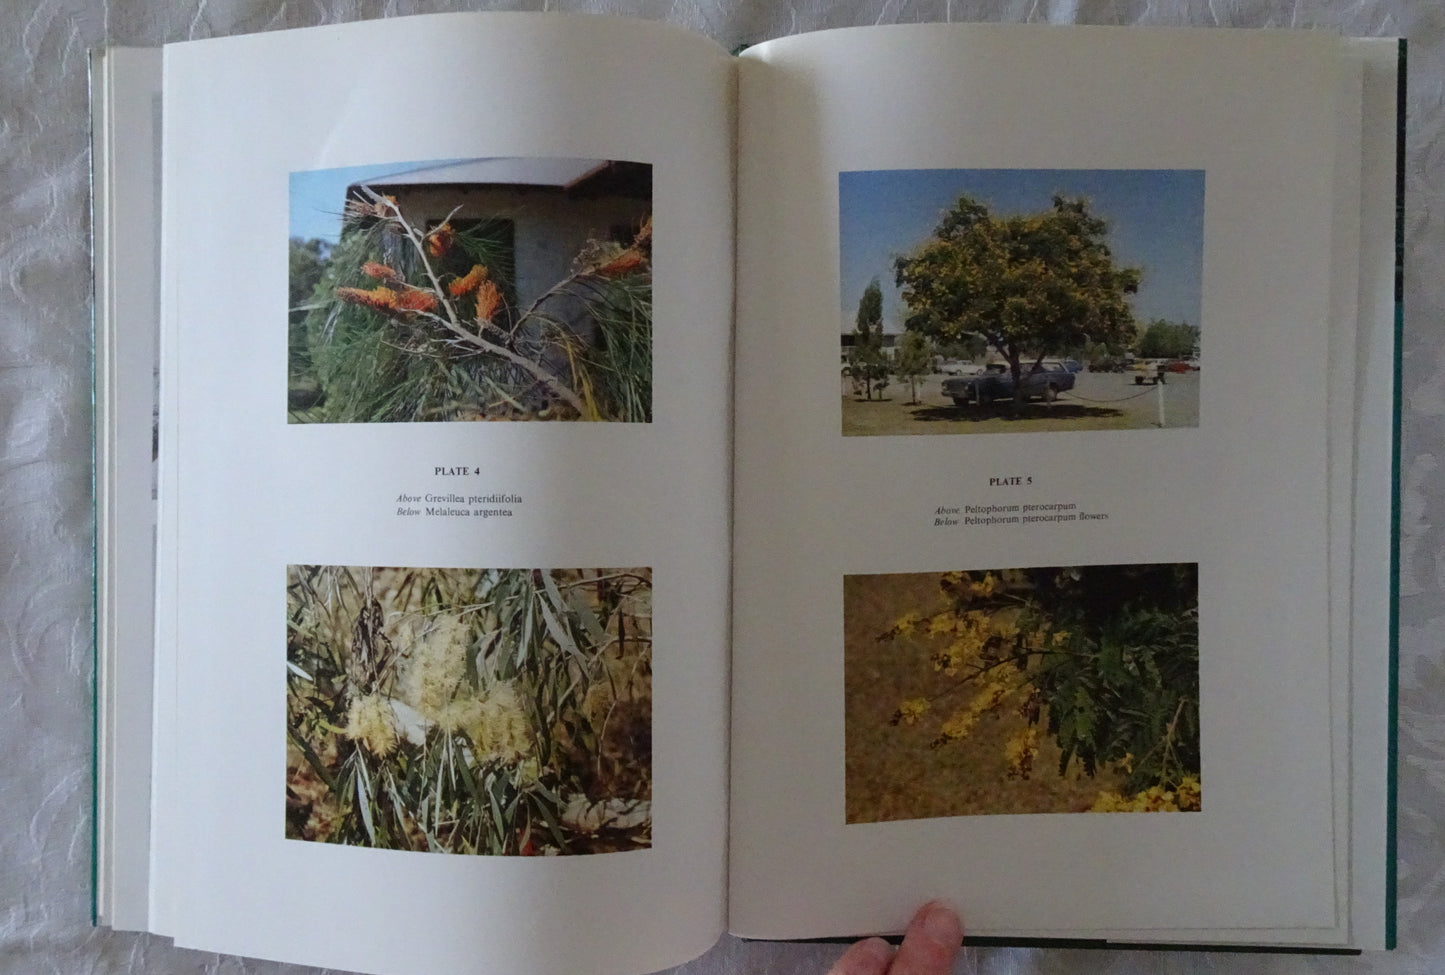 Trees For Darwin and Northern Australia by D. A. Hearne